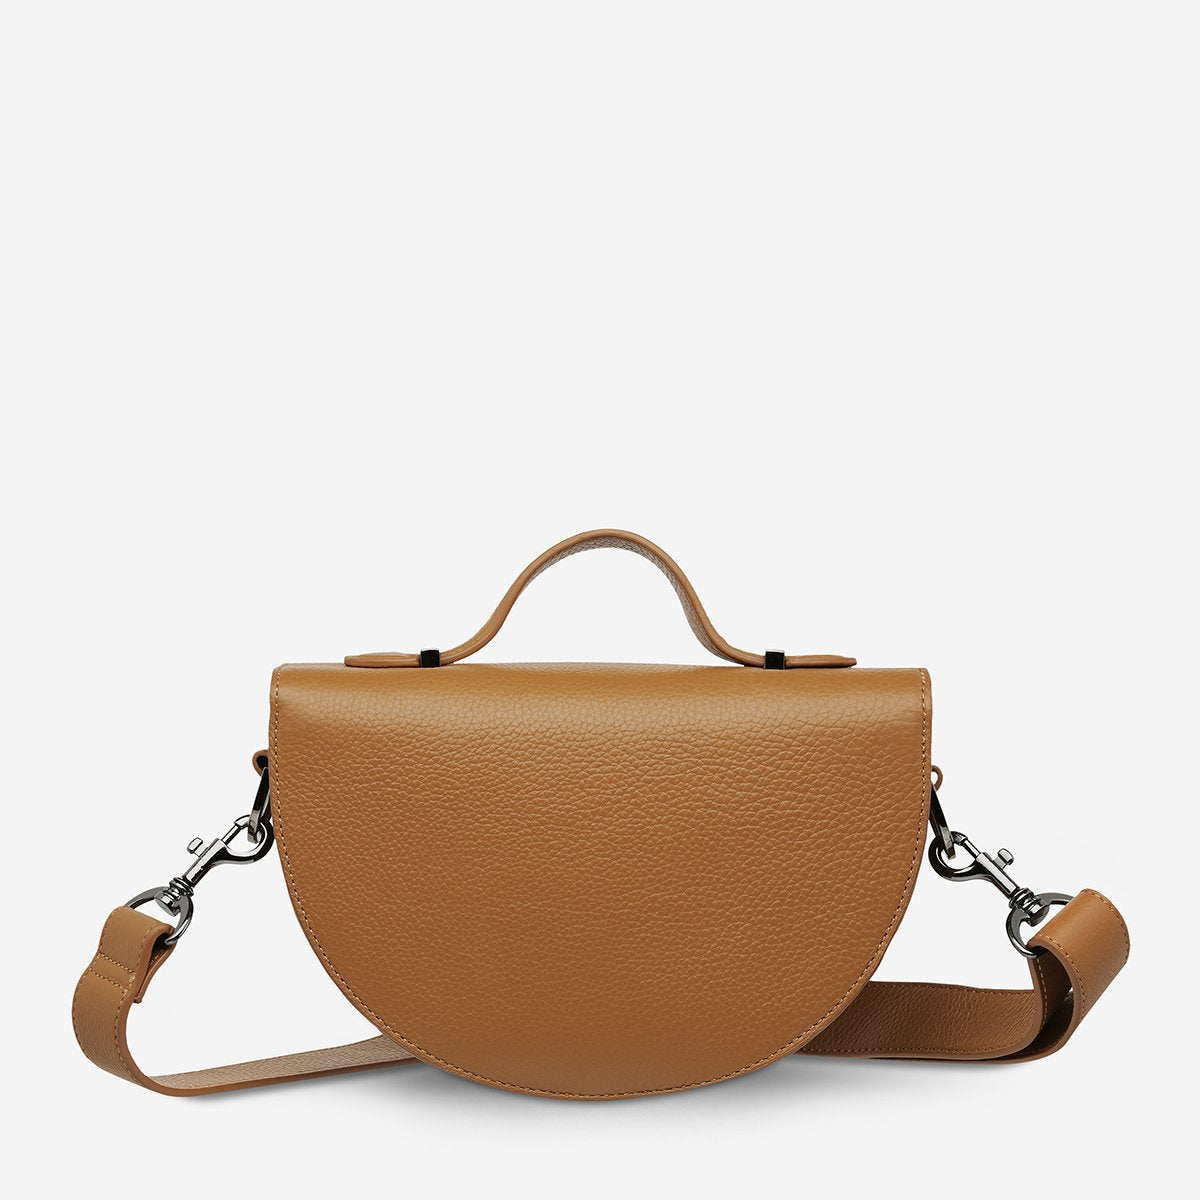 All Nighter Leather Crossbody Bag in Tan